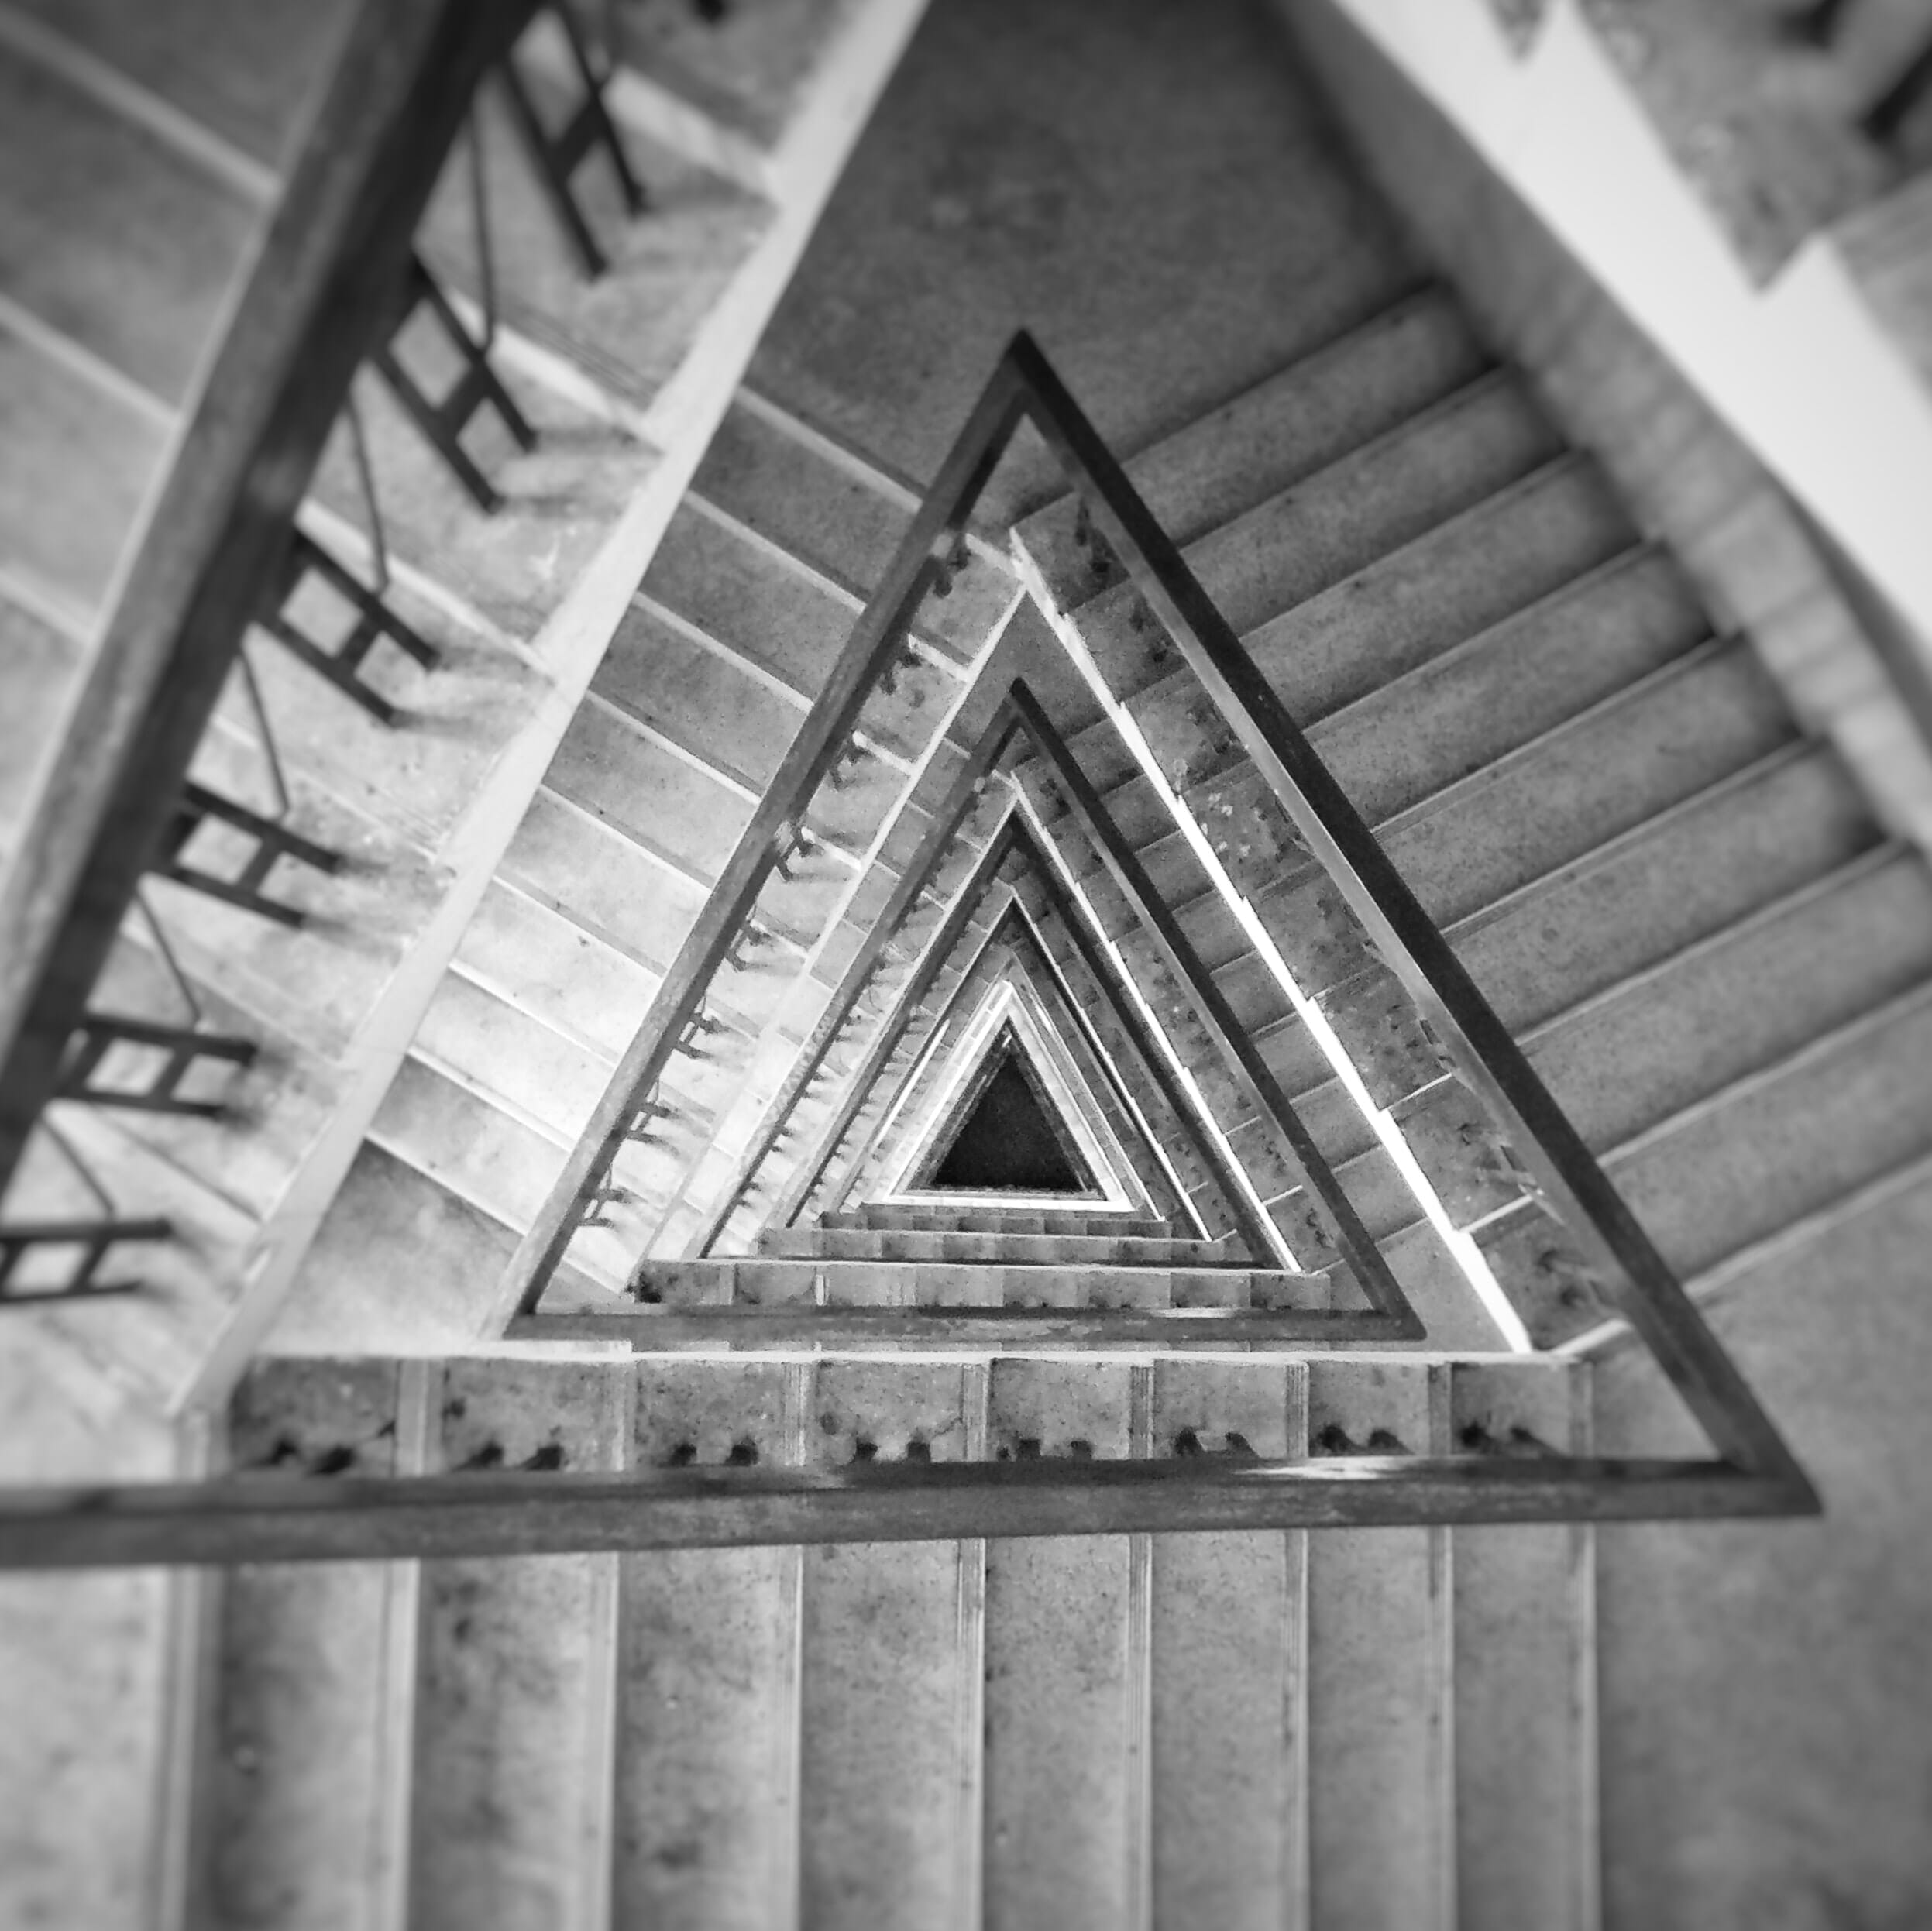 A triangular staircase viewed from above and descending downward in black and white.